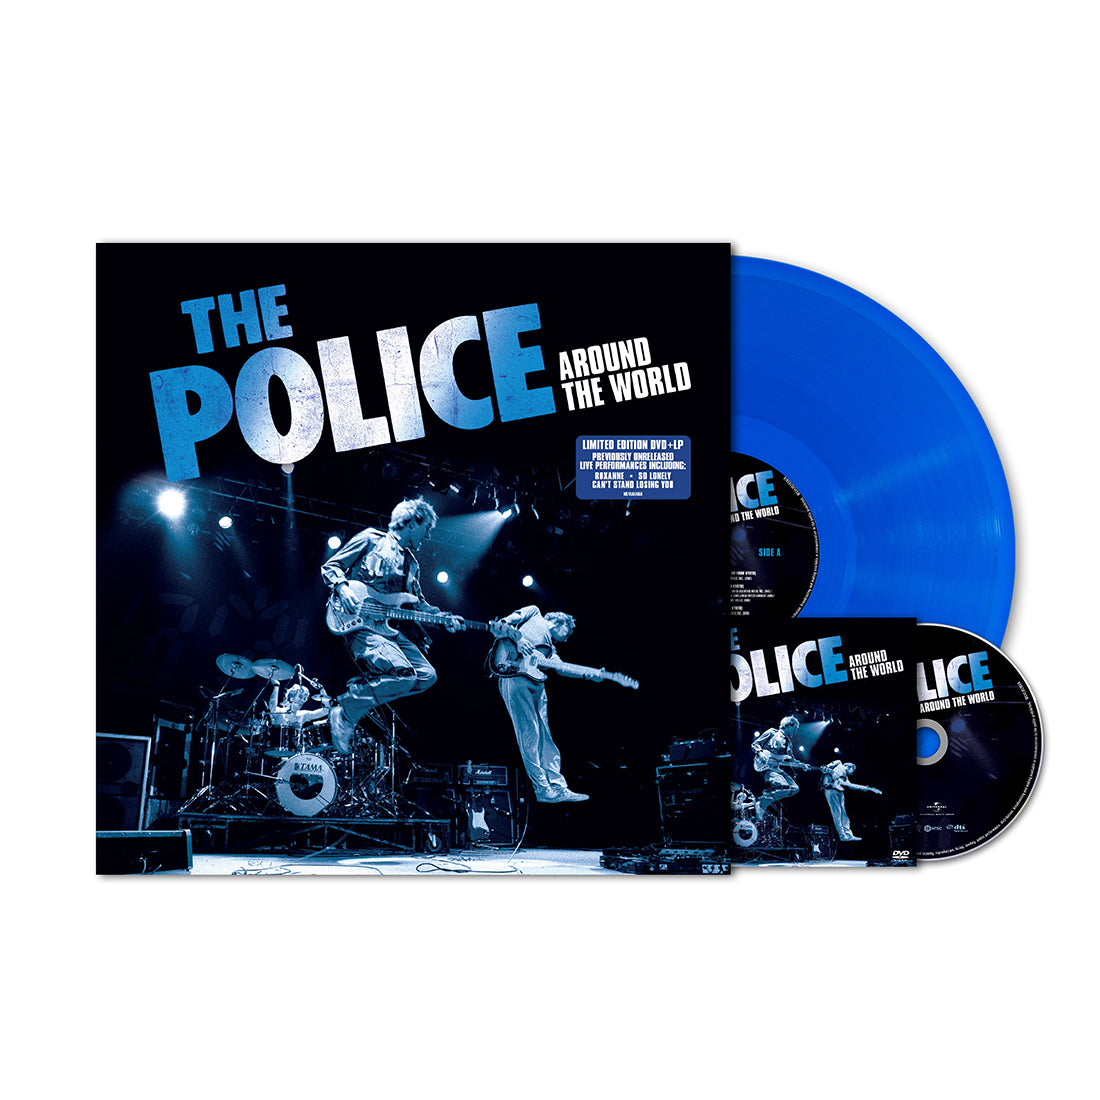 The Police - Around The World - Restored + Expanded: Translucent Blue Vinyl LP + DVD